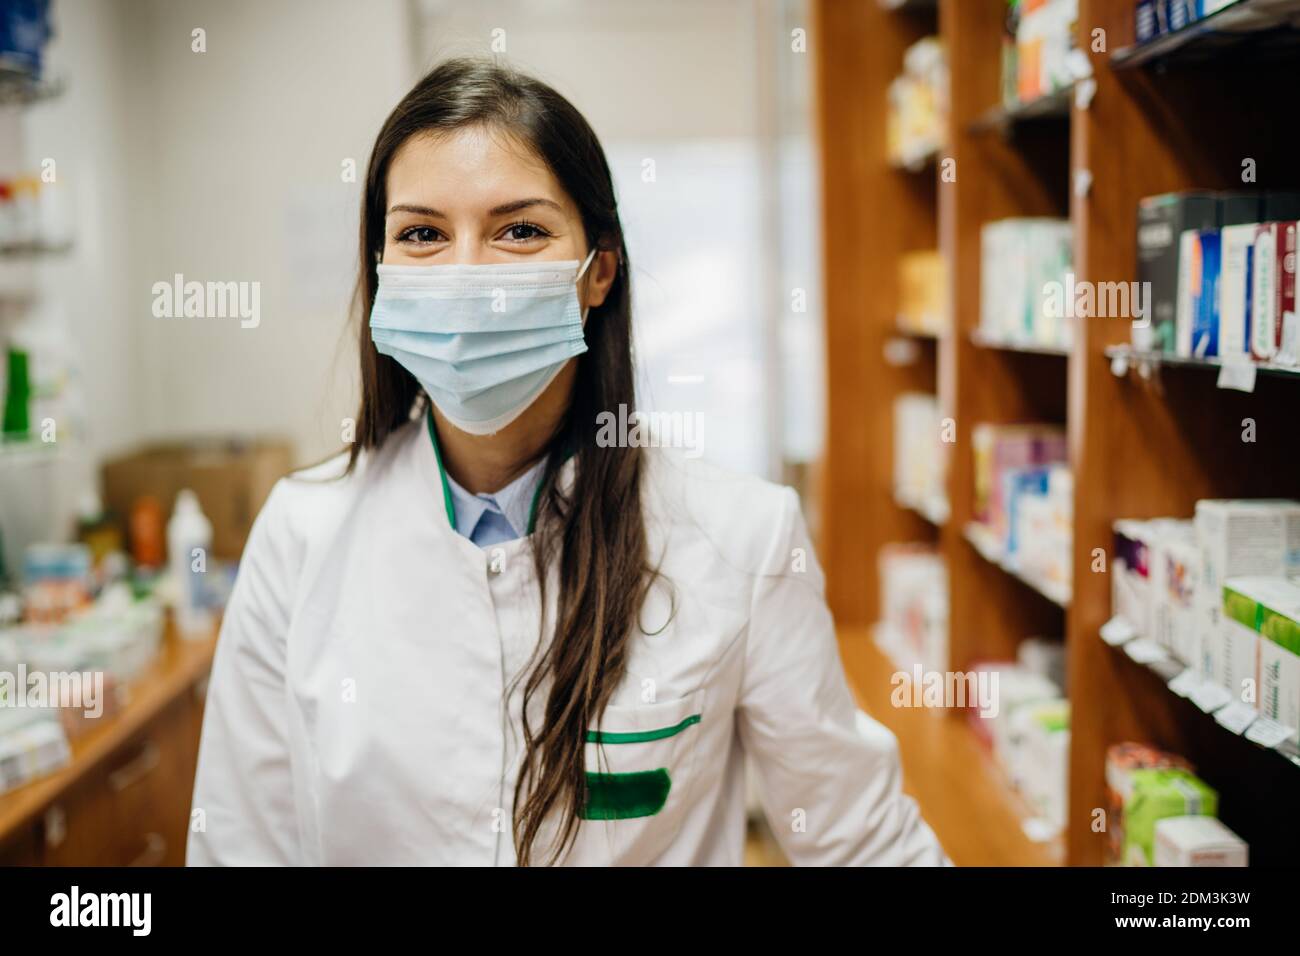 Friendly pharmacist working in a pharmacy amid coronavirus pandemic.Pharmaceutical health care professional providing COVID-19 therapy support.MPharm Stock Photo